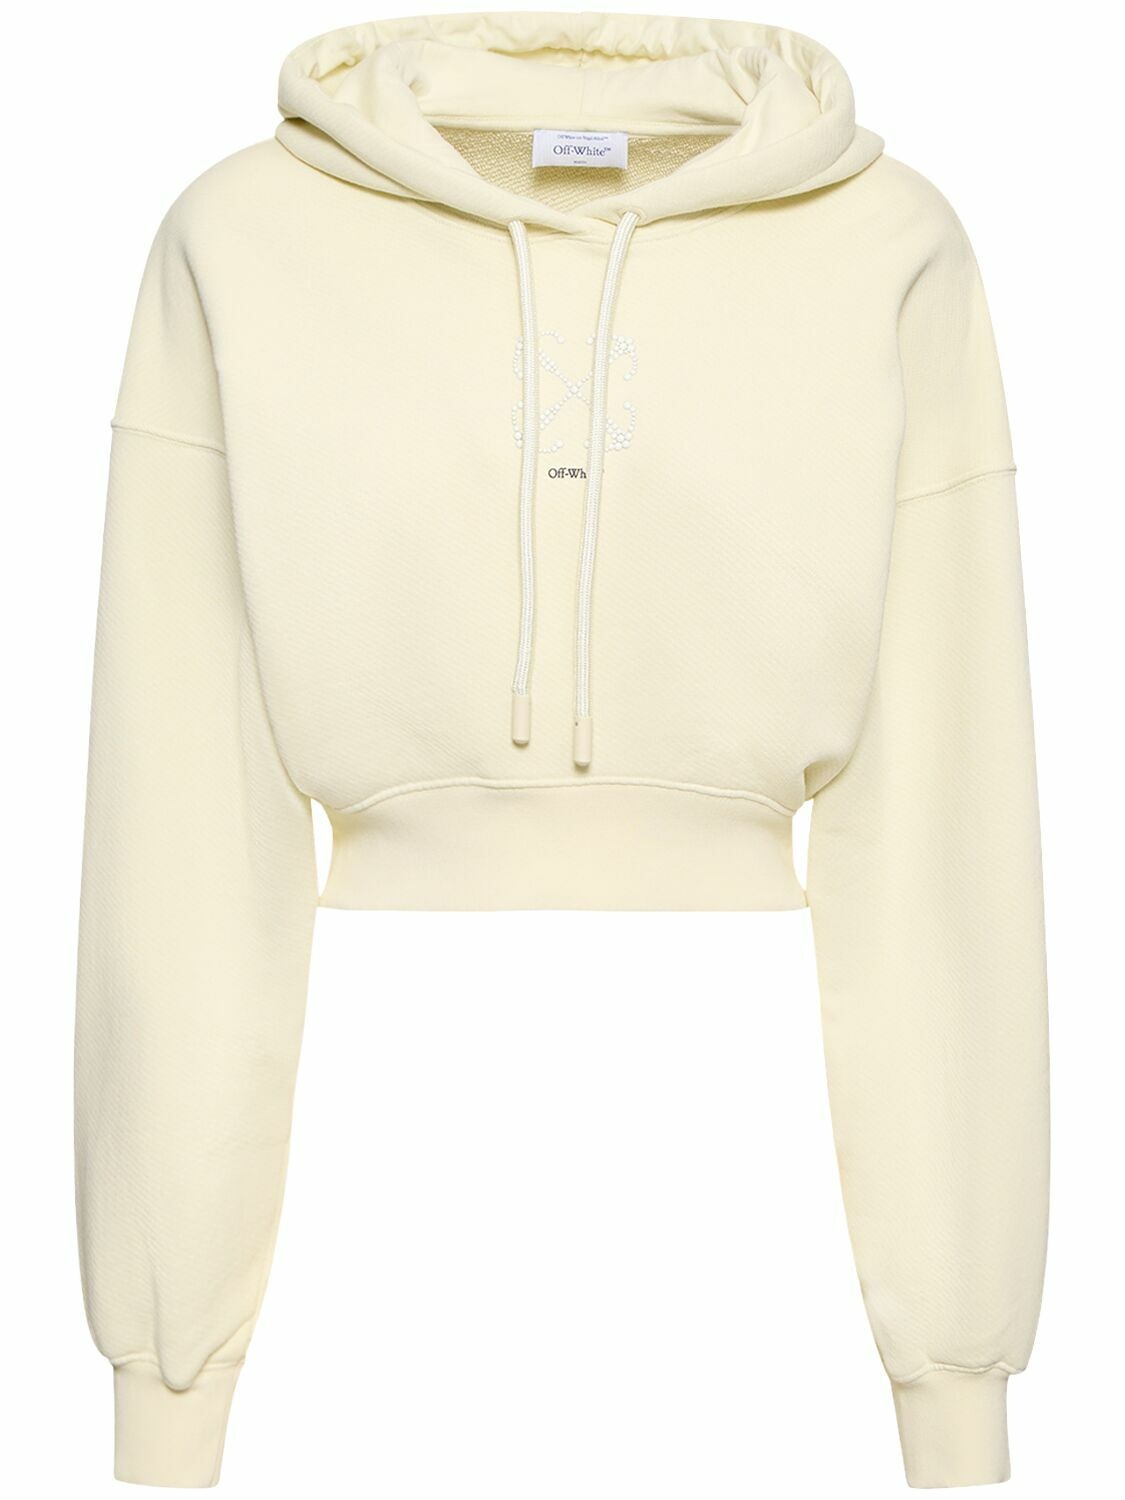 Photo: OFF-WHITE Embellished Cotton Cropped Hoodie